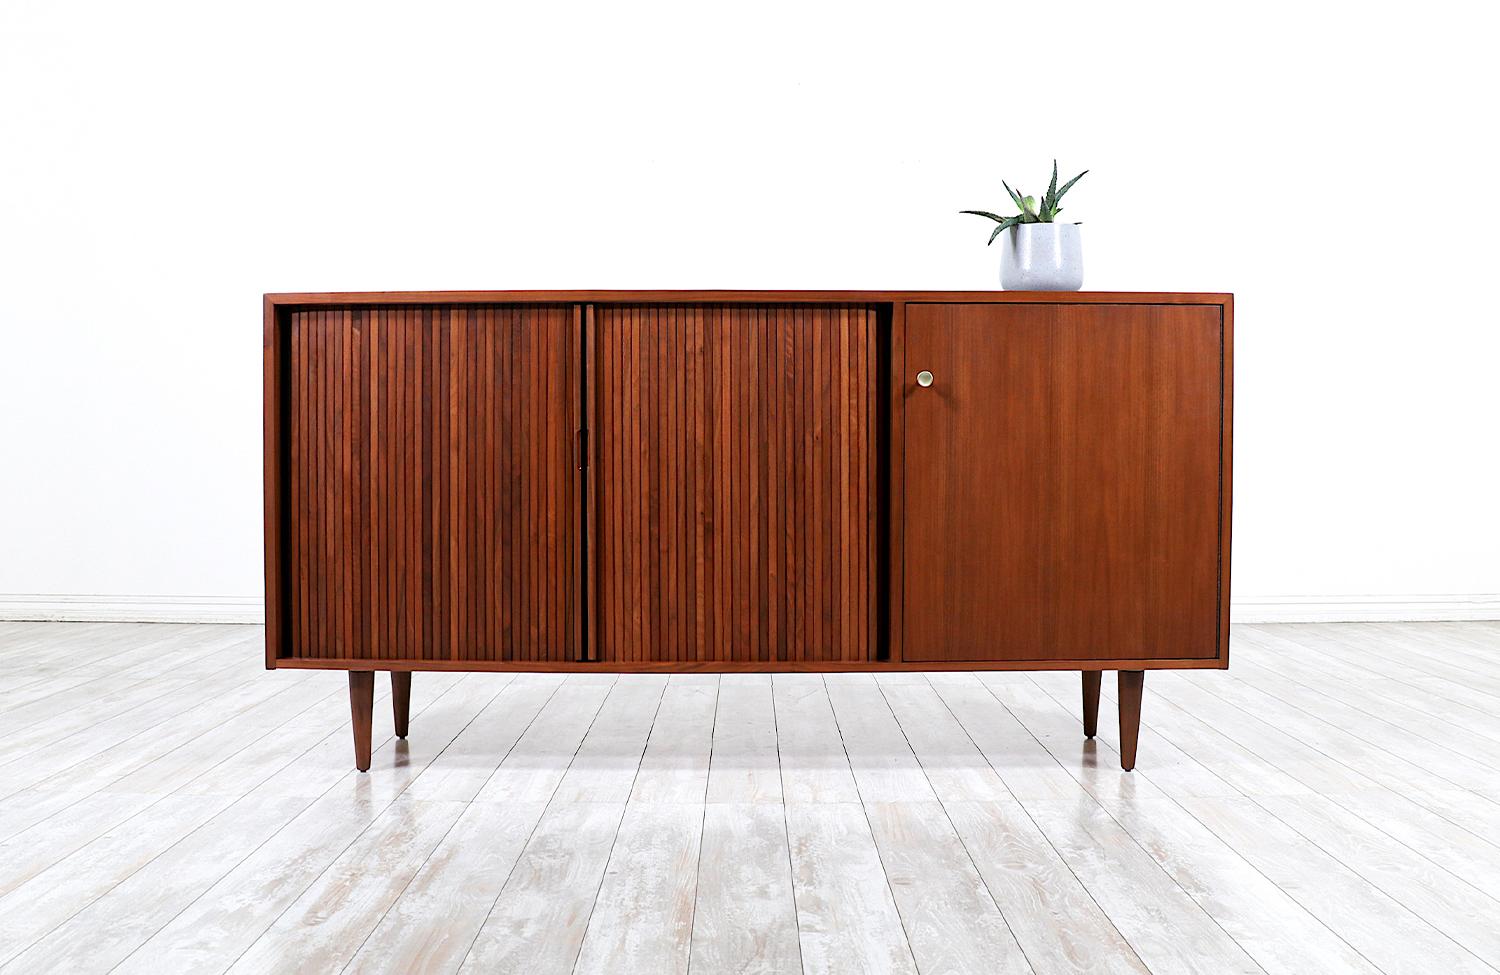 Mid Century Modern Credenza designed by Milo Baughman for Glenn of California in the United States circa 1950’s. Supported by tapered legs and crafted with a walnut frame and two tambour doors that smoothly glide open to reveal a spacious shelved